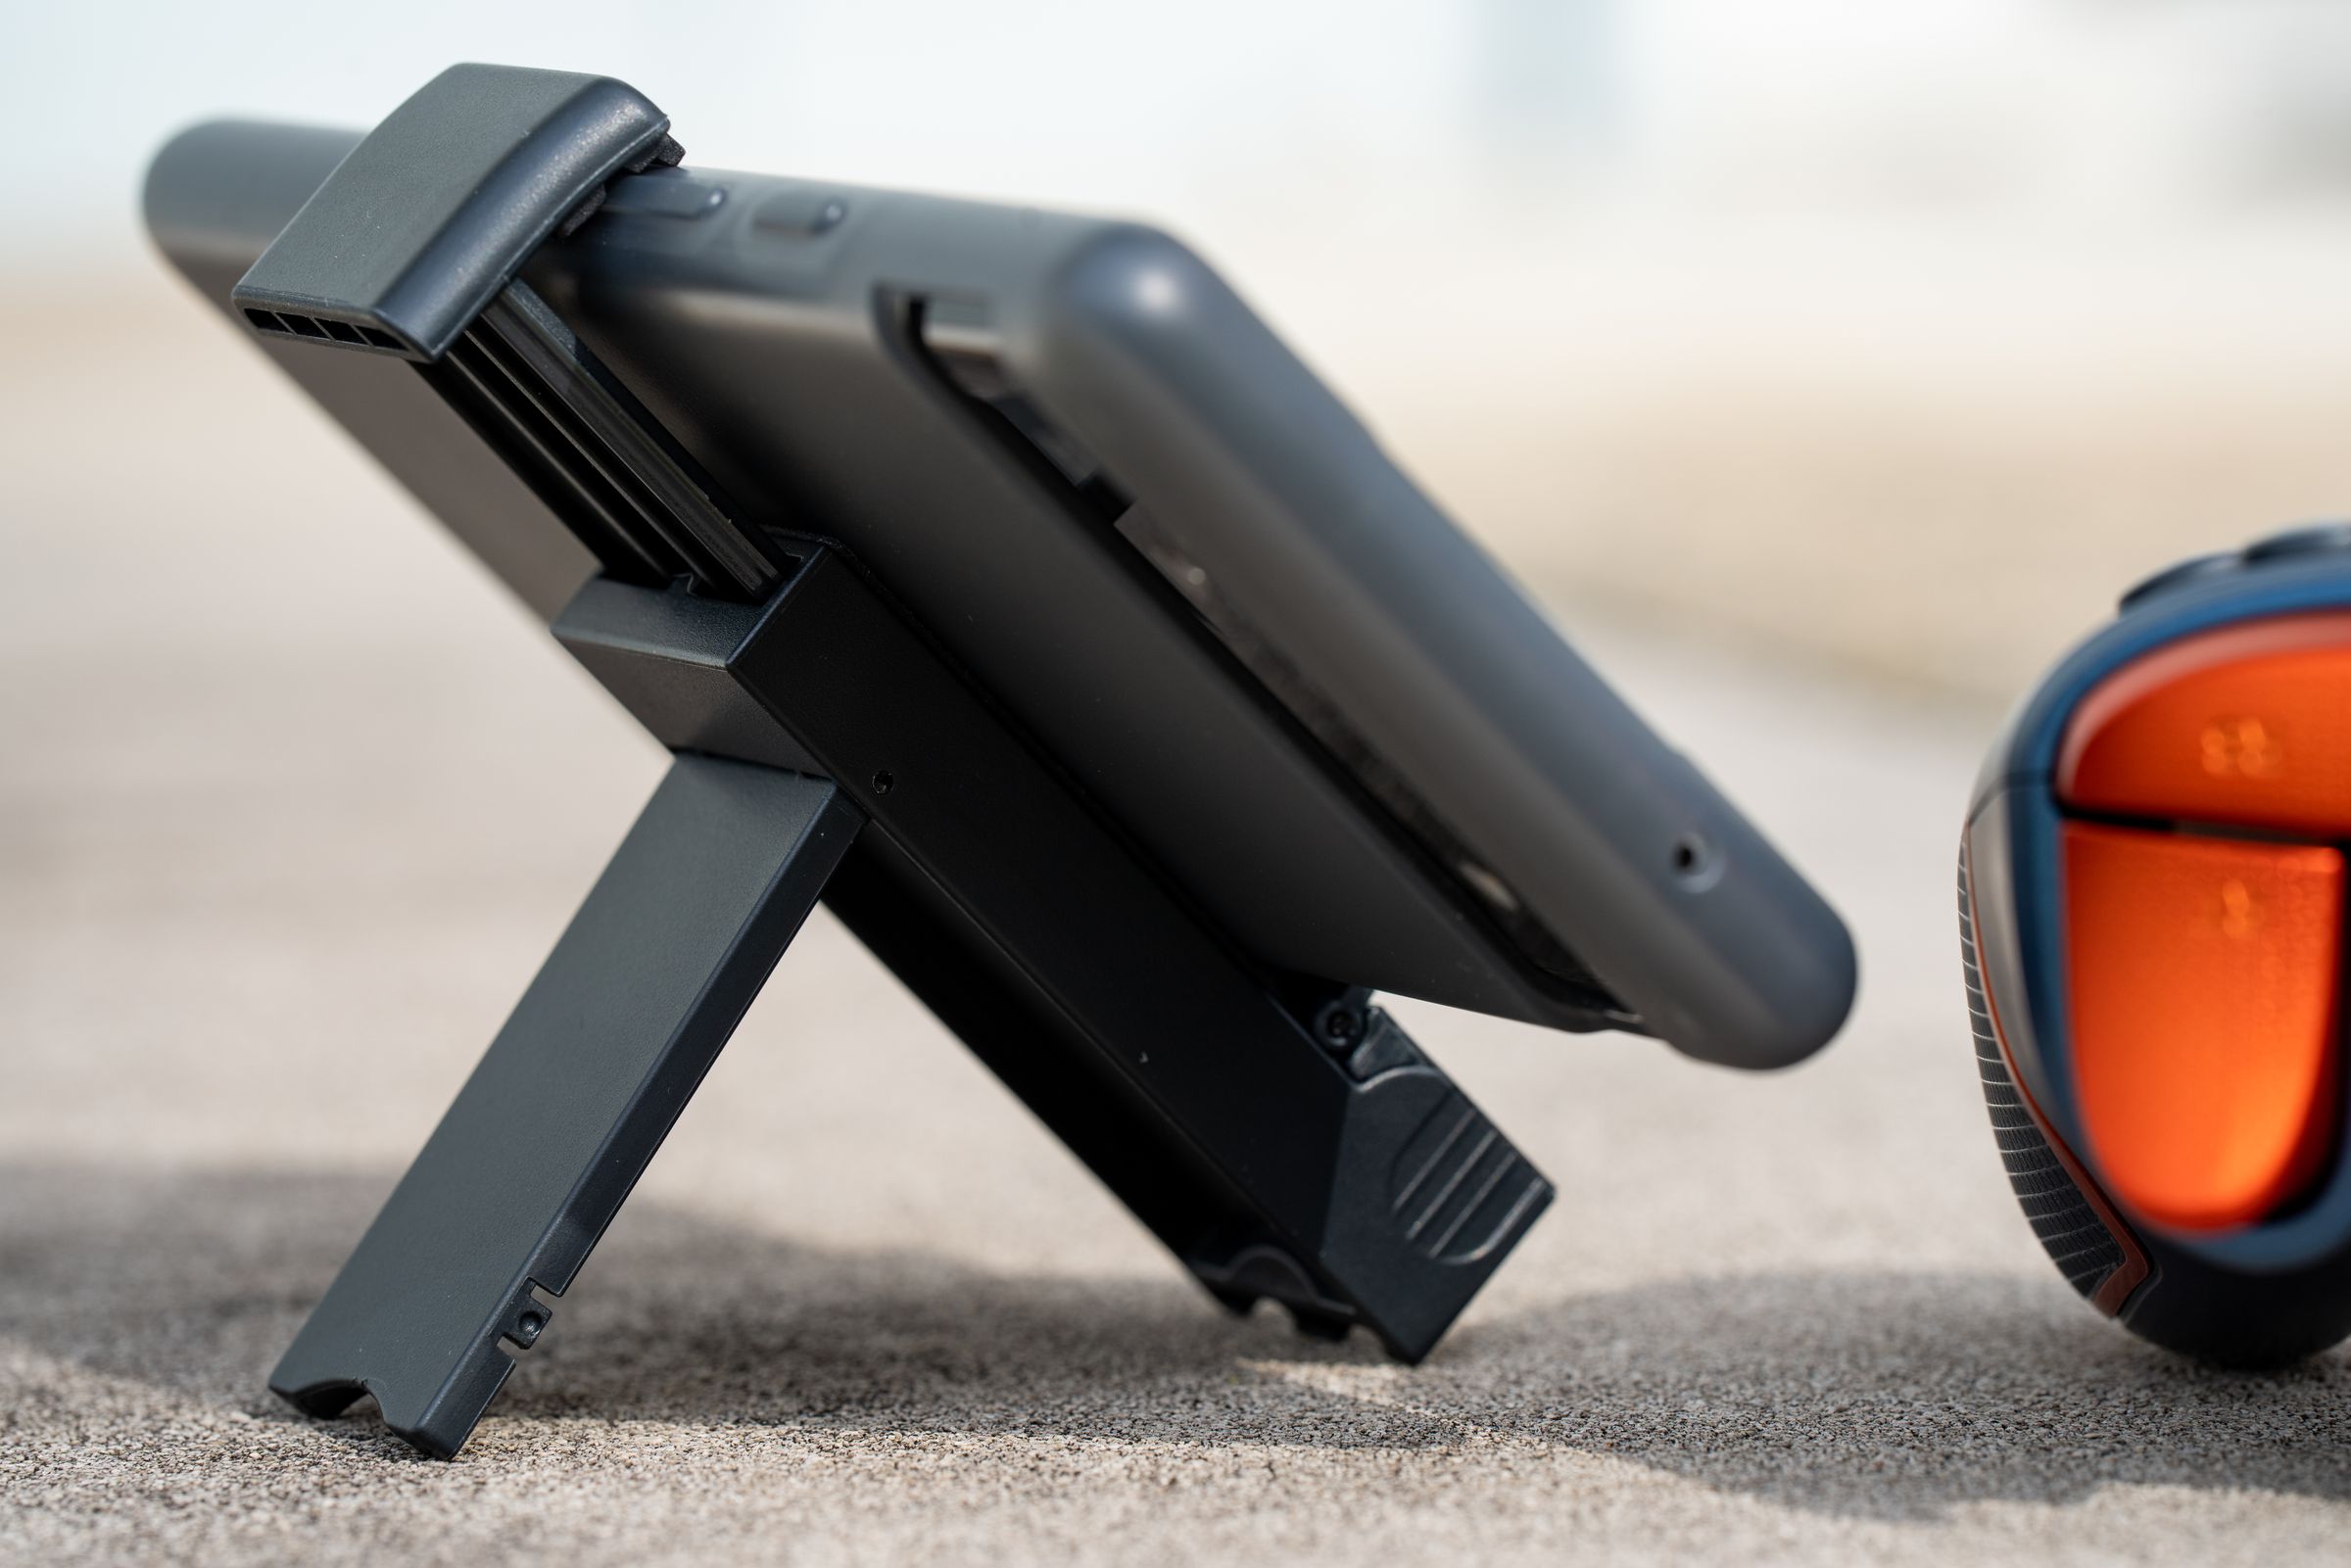 Propping your phone up like this feels precarious at first, but it balances well, and it’s still better than the standard Nintendo Switch kickstand.